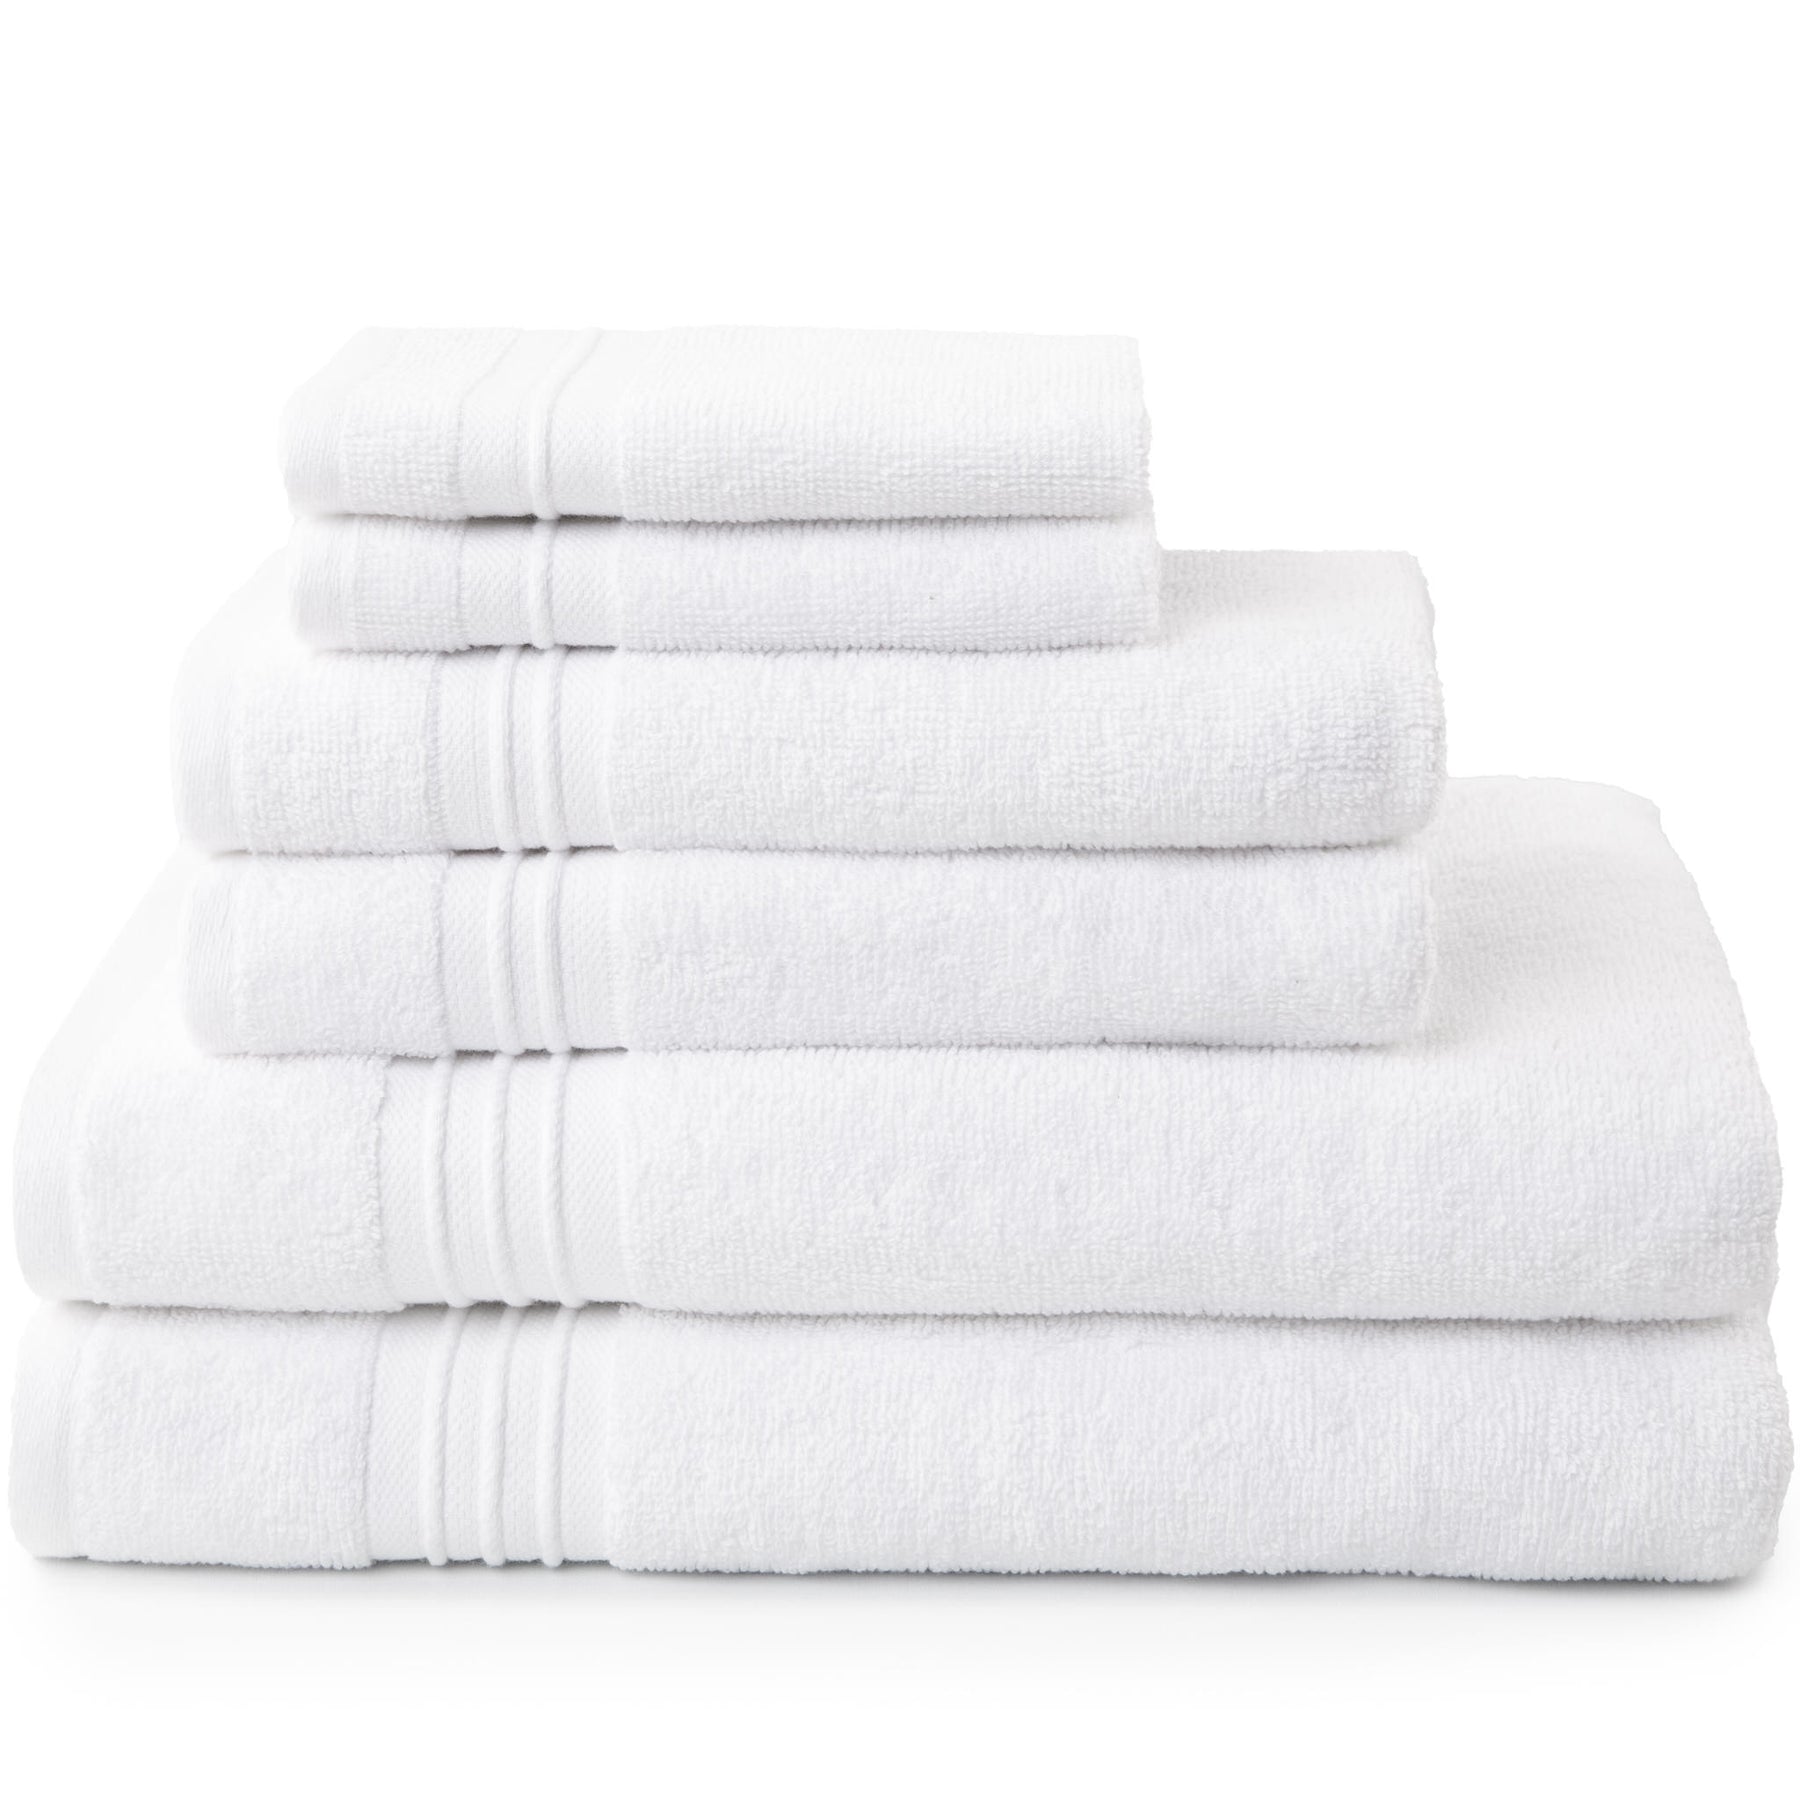 13 x 13 Luxury Spa Bleach Safe Collection Oversized Bath Towel 2 Pack. 100% Organic Cotton Grown, Plush Feel, Woven Fabric, and High-Performance.